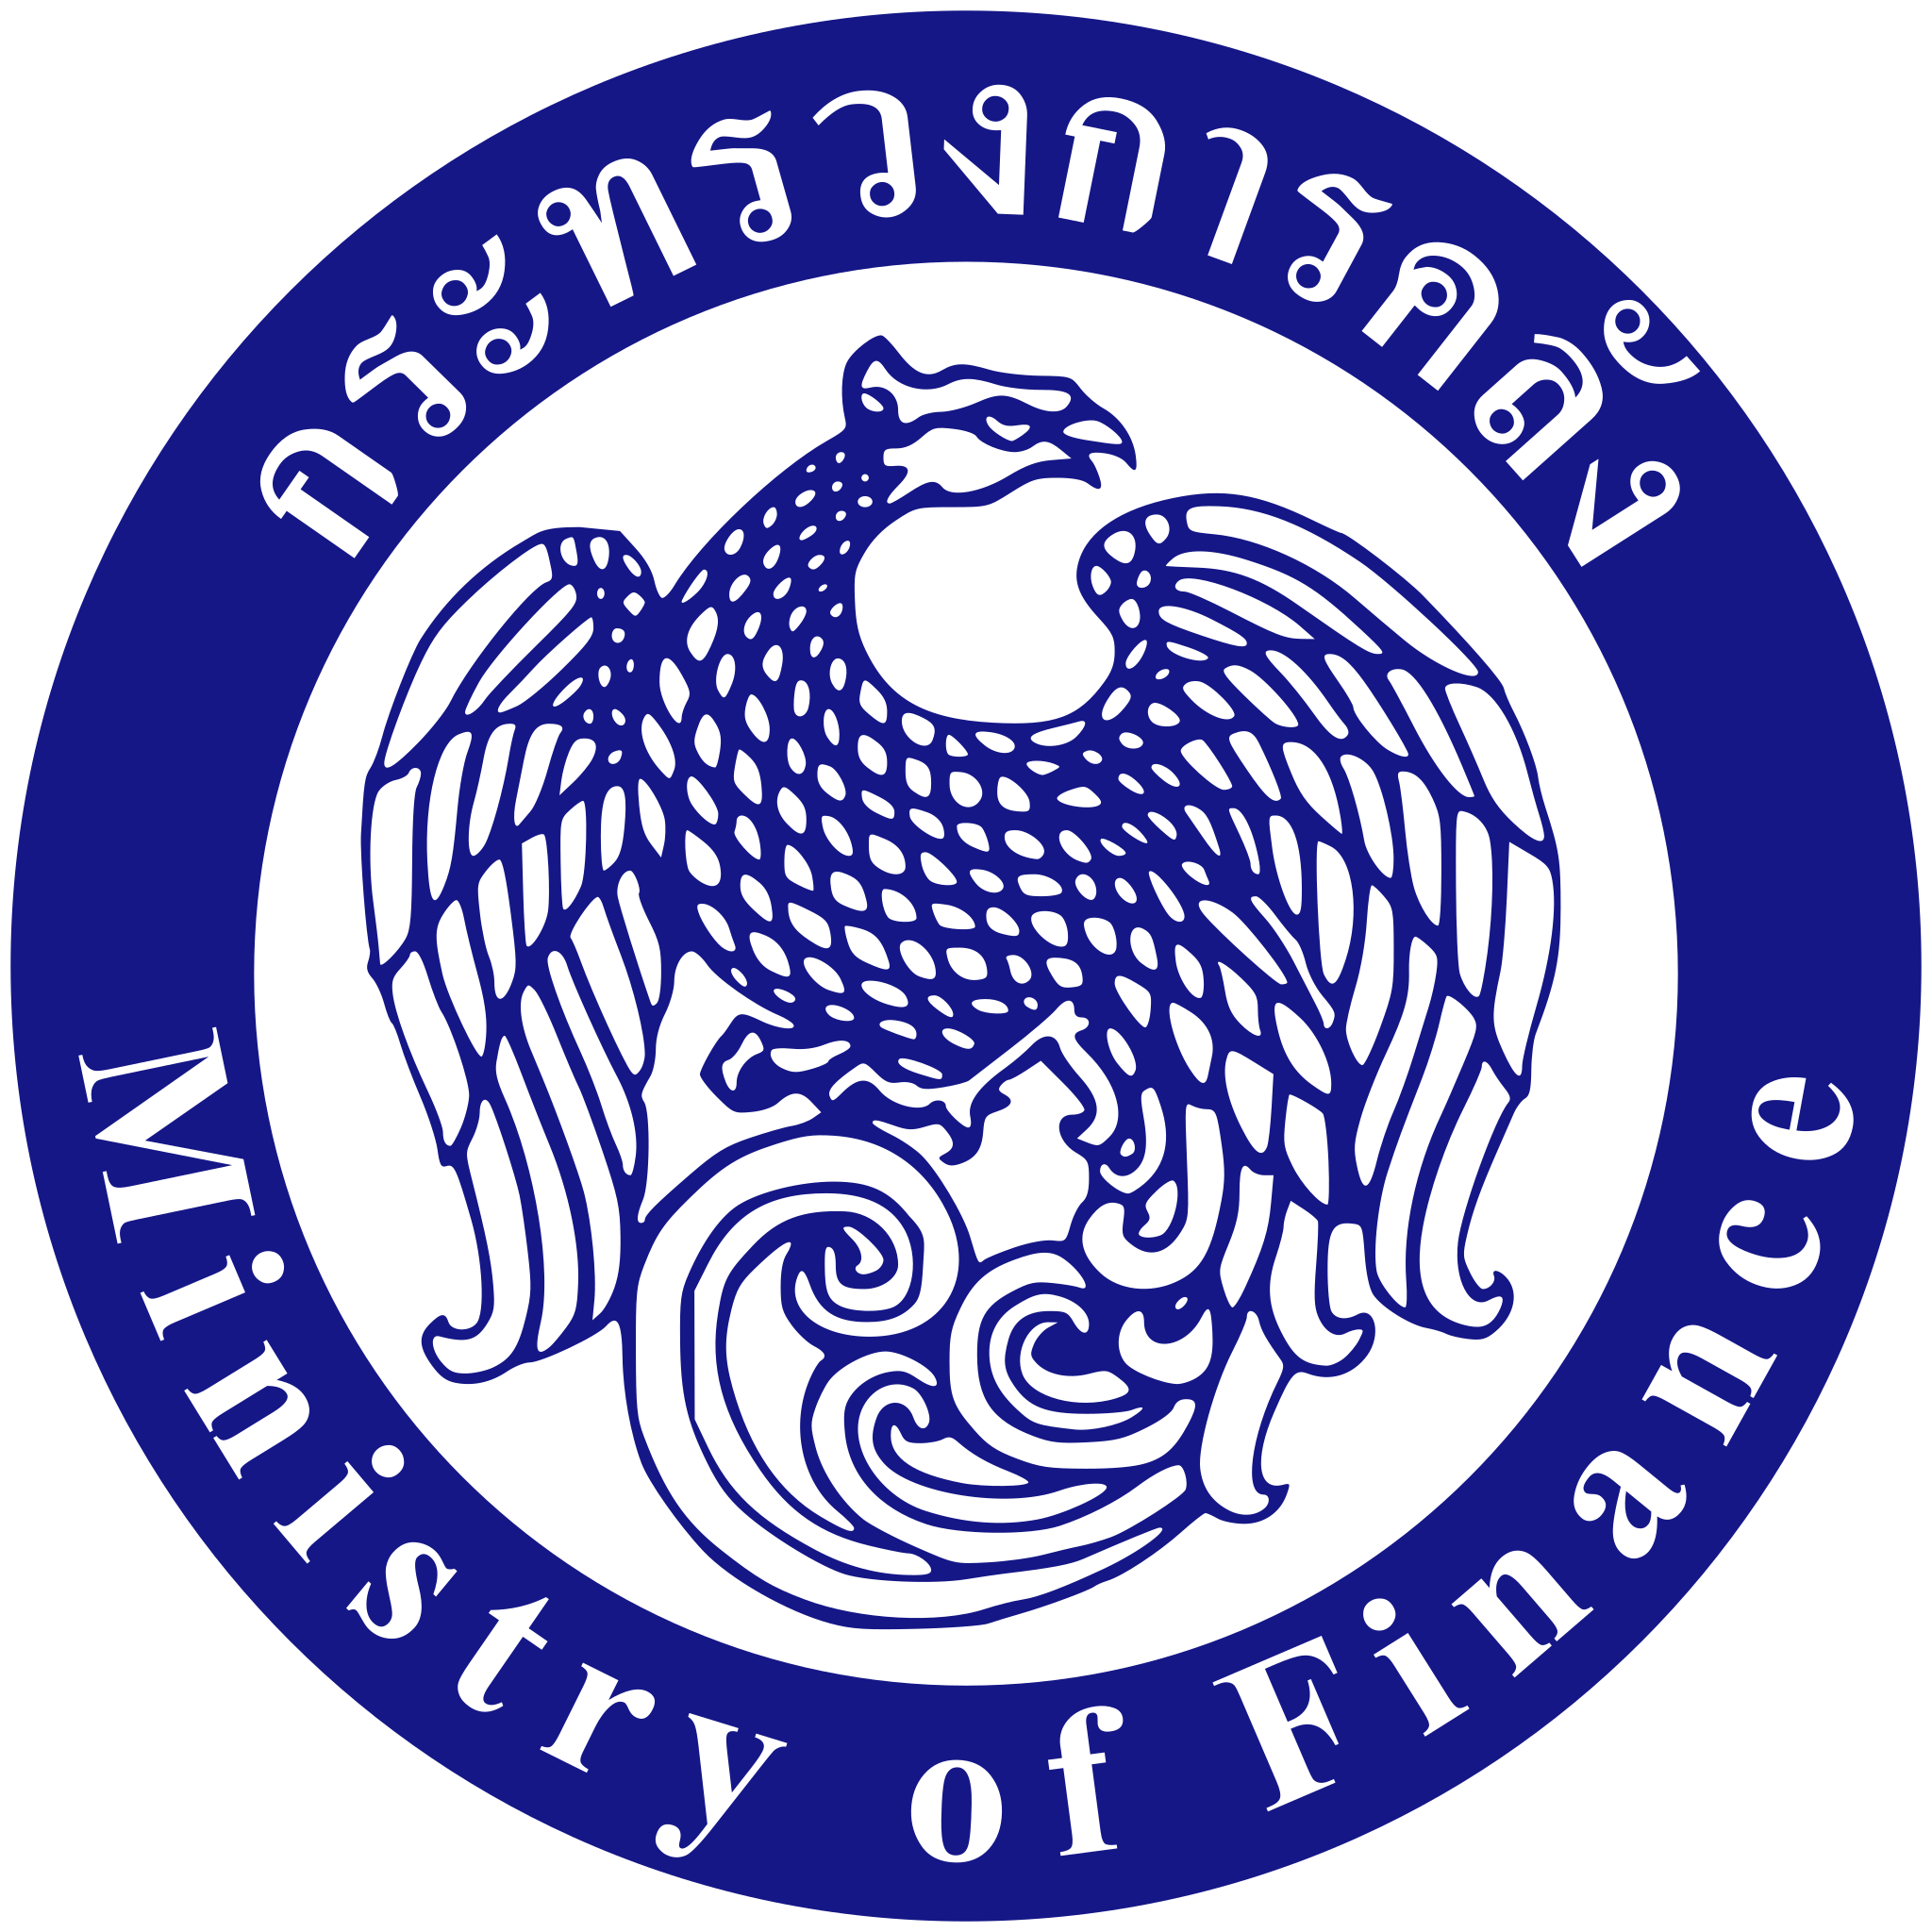 2048px-Seal_of_the_Ministry_of_Finance_of_Thailand.svg.png